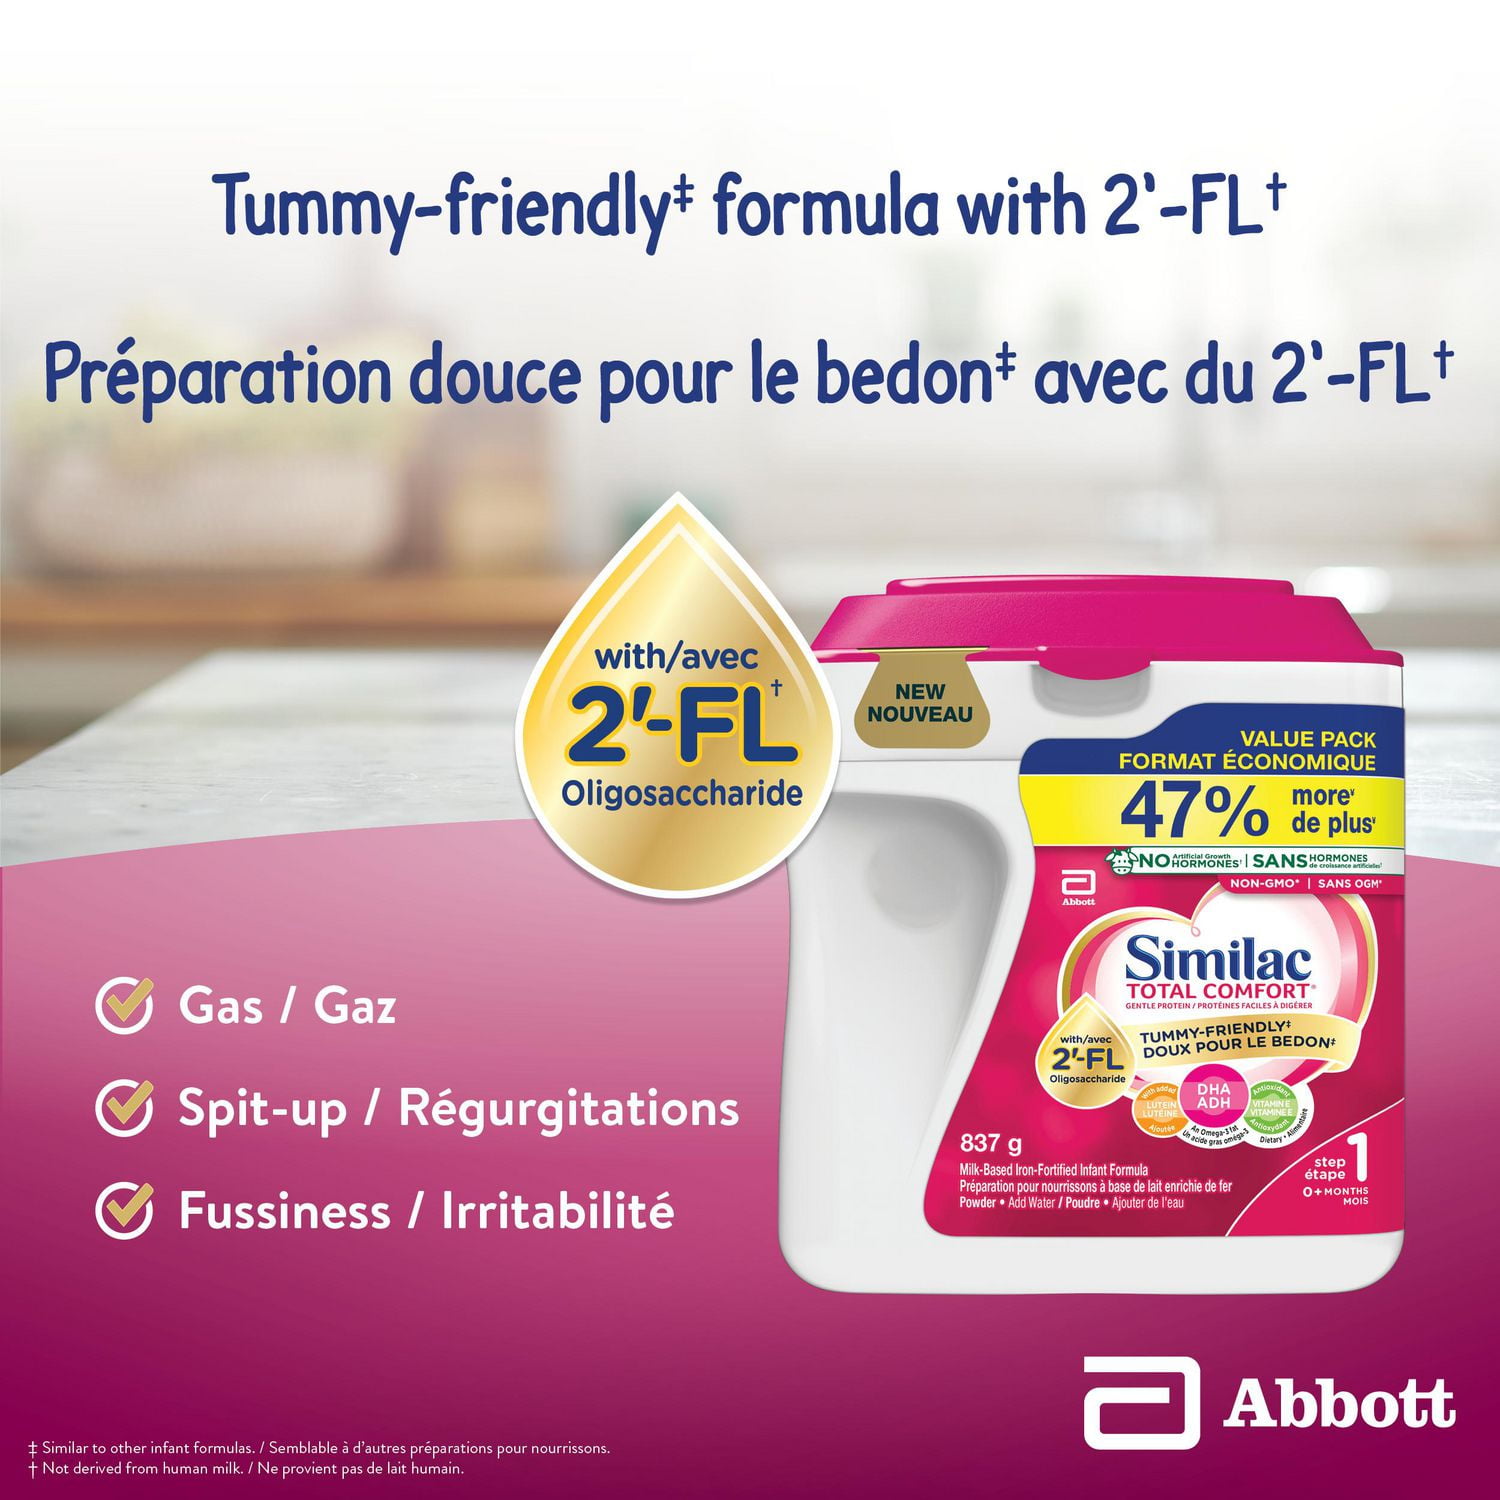 Similac Total Comfort, Baby Formula, Tummy-Friendly, Easy To